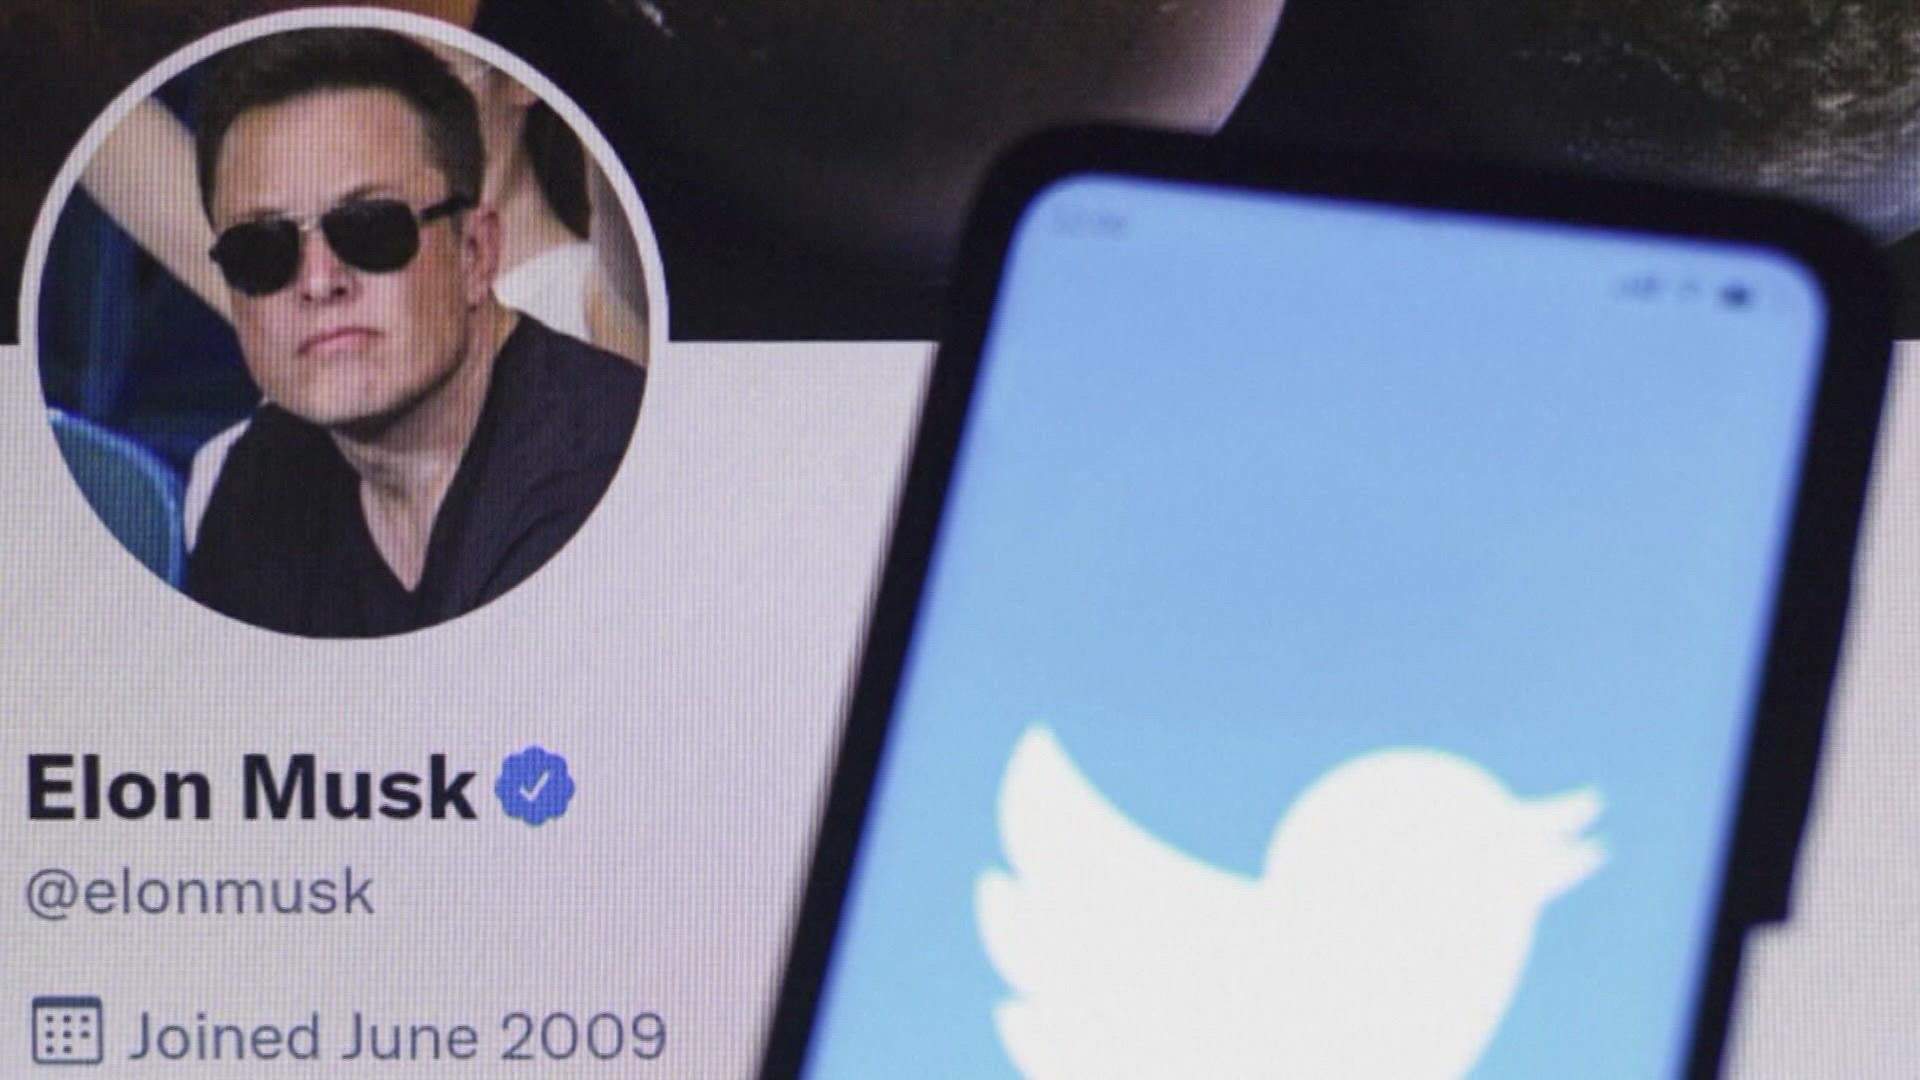 In an about-face, Elon Musk has agreed to buy Twitter at his originally agreed-upon price of $44 Billion.